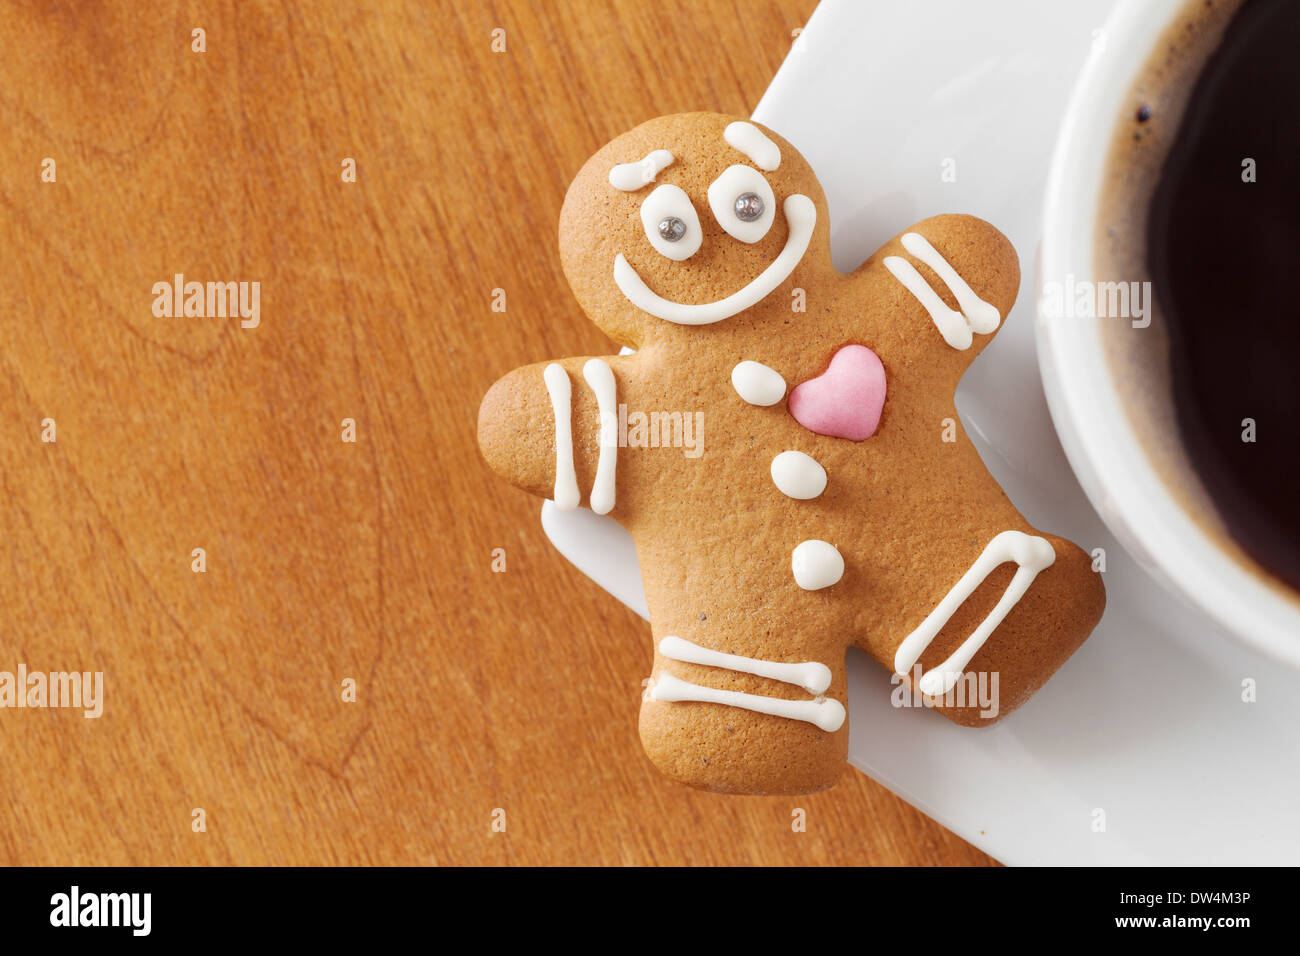 smiling gingerbread man and coffee cup on table Stock Photo